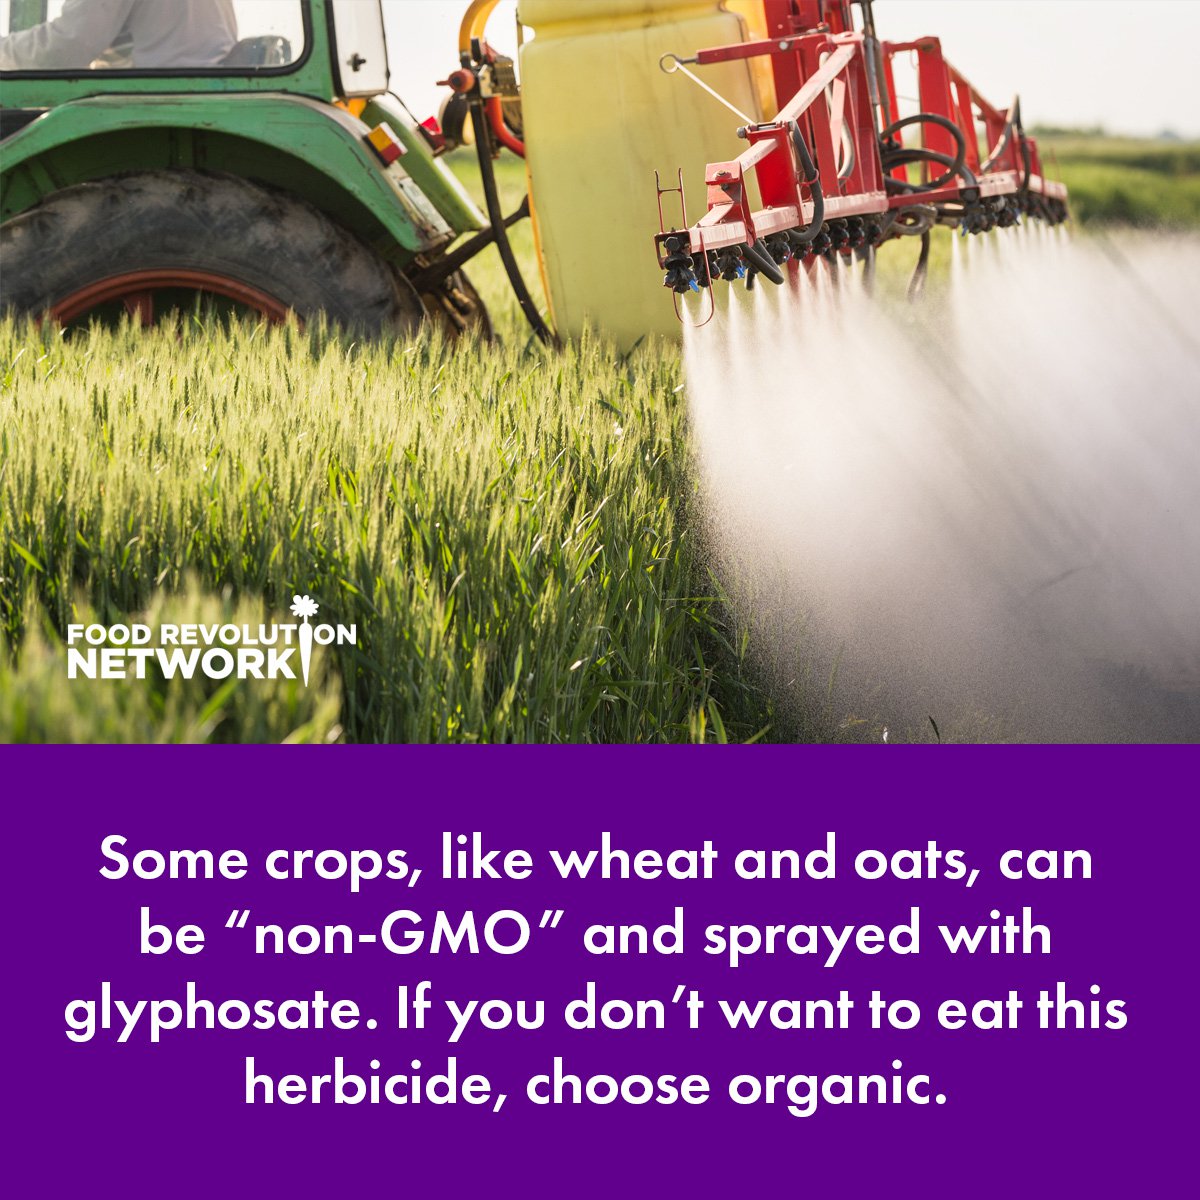 Some crops like wheat and oats can be "non-GMO" and sprayed with glyphosate. If you don't want to eat this herbicide, choose organic.